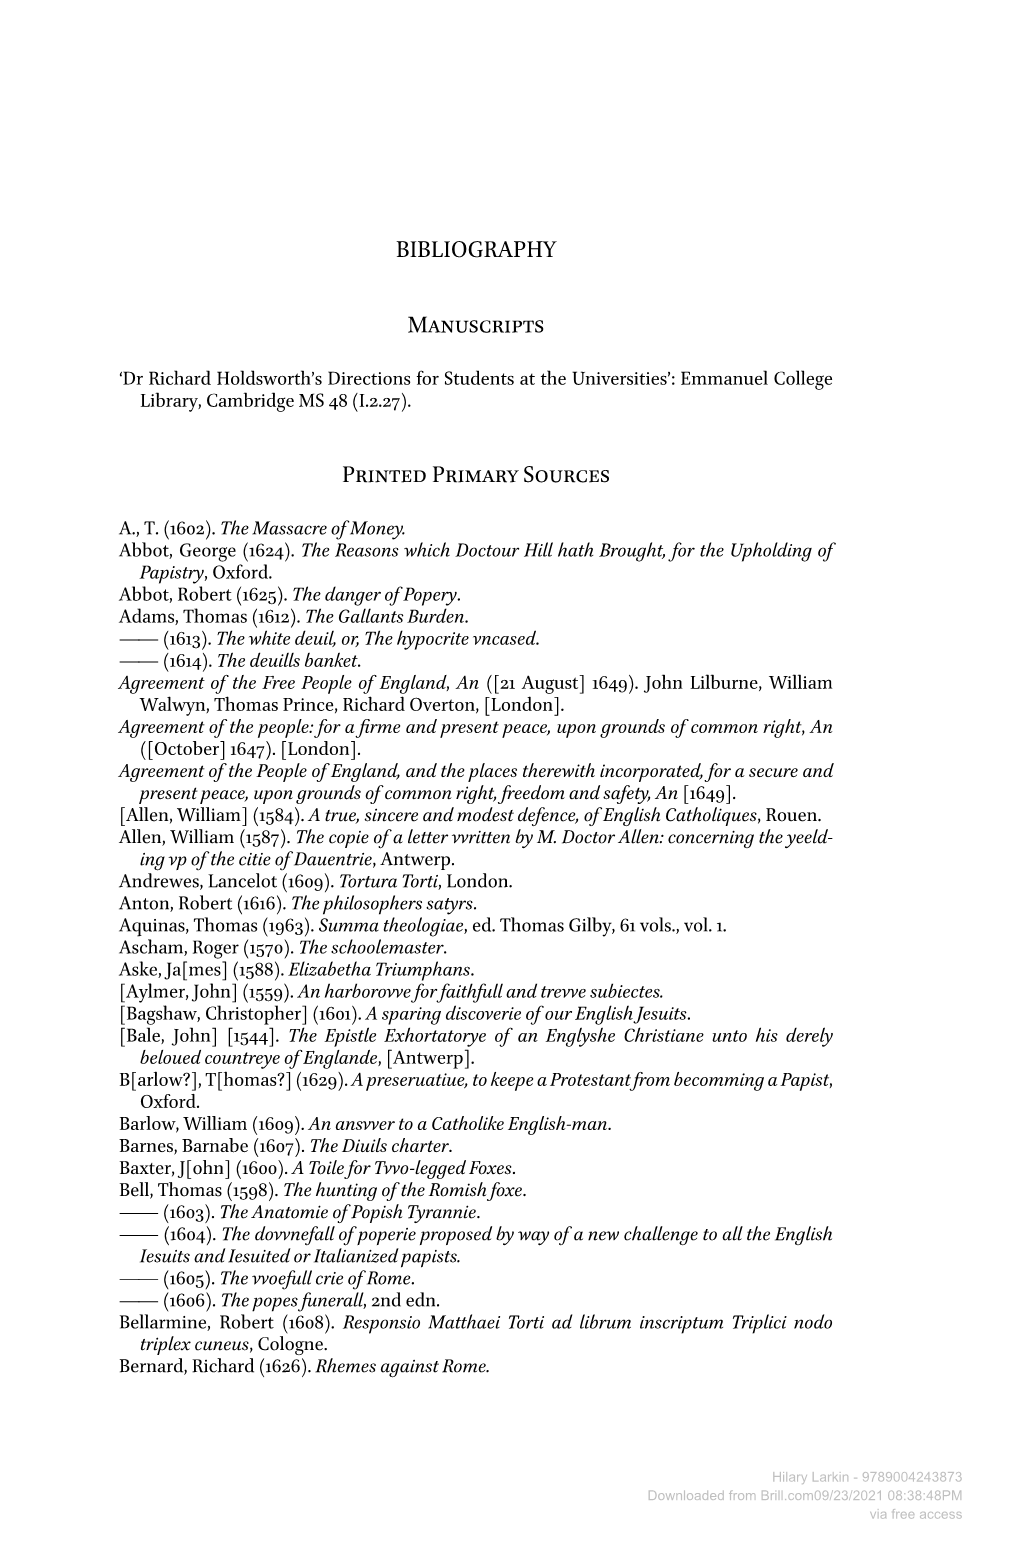 BIBLIOGRAPHY Manuscripts Printed Primary Sources